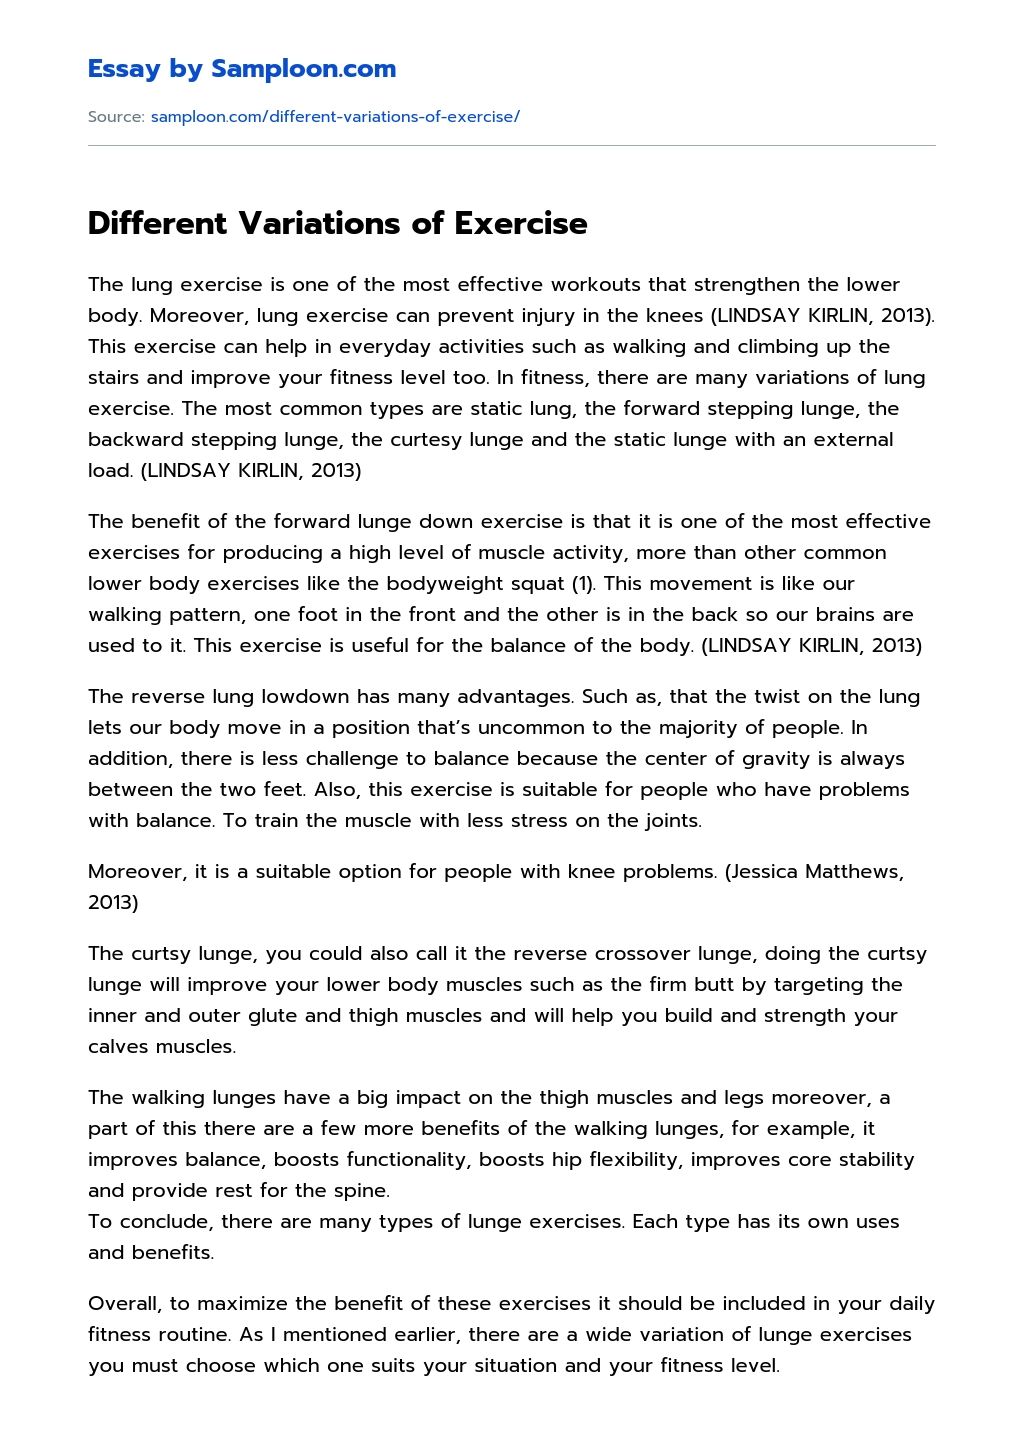 Different Variations of Exercise essay